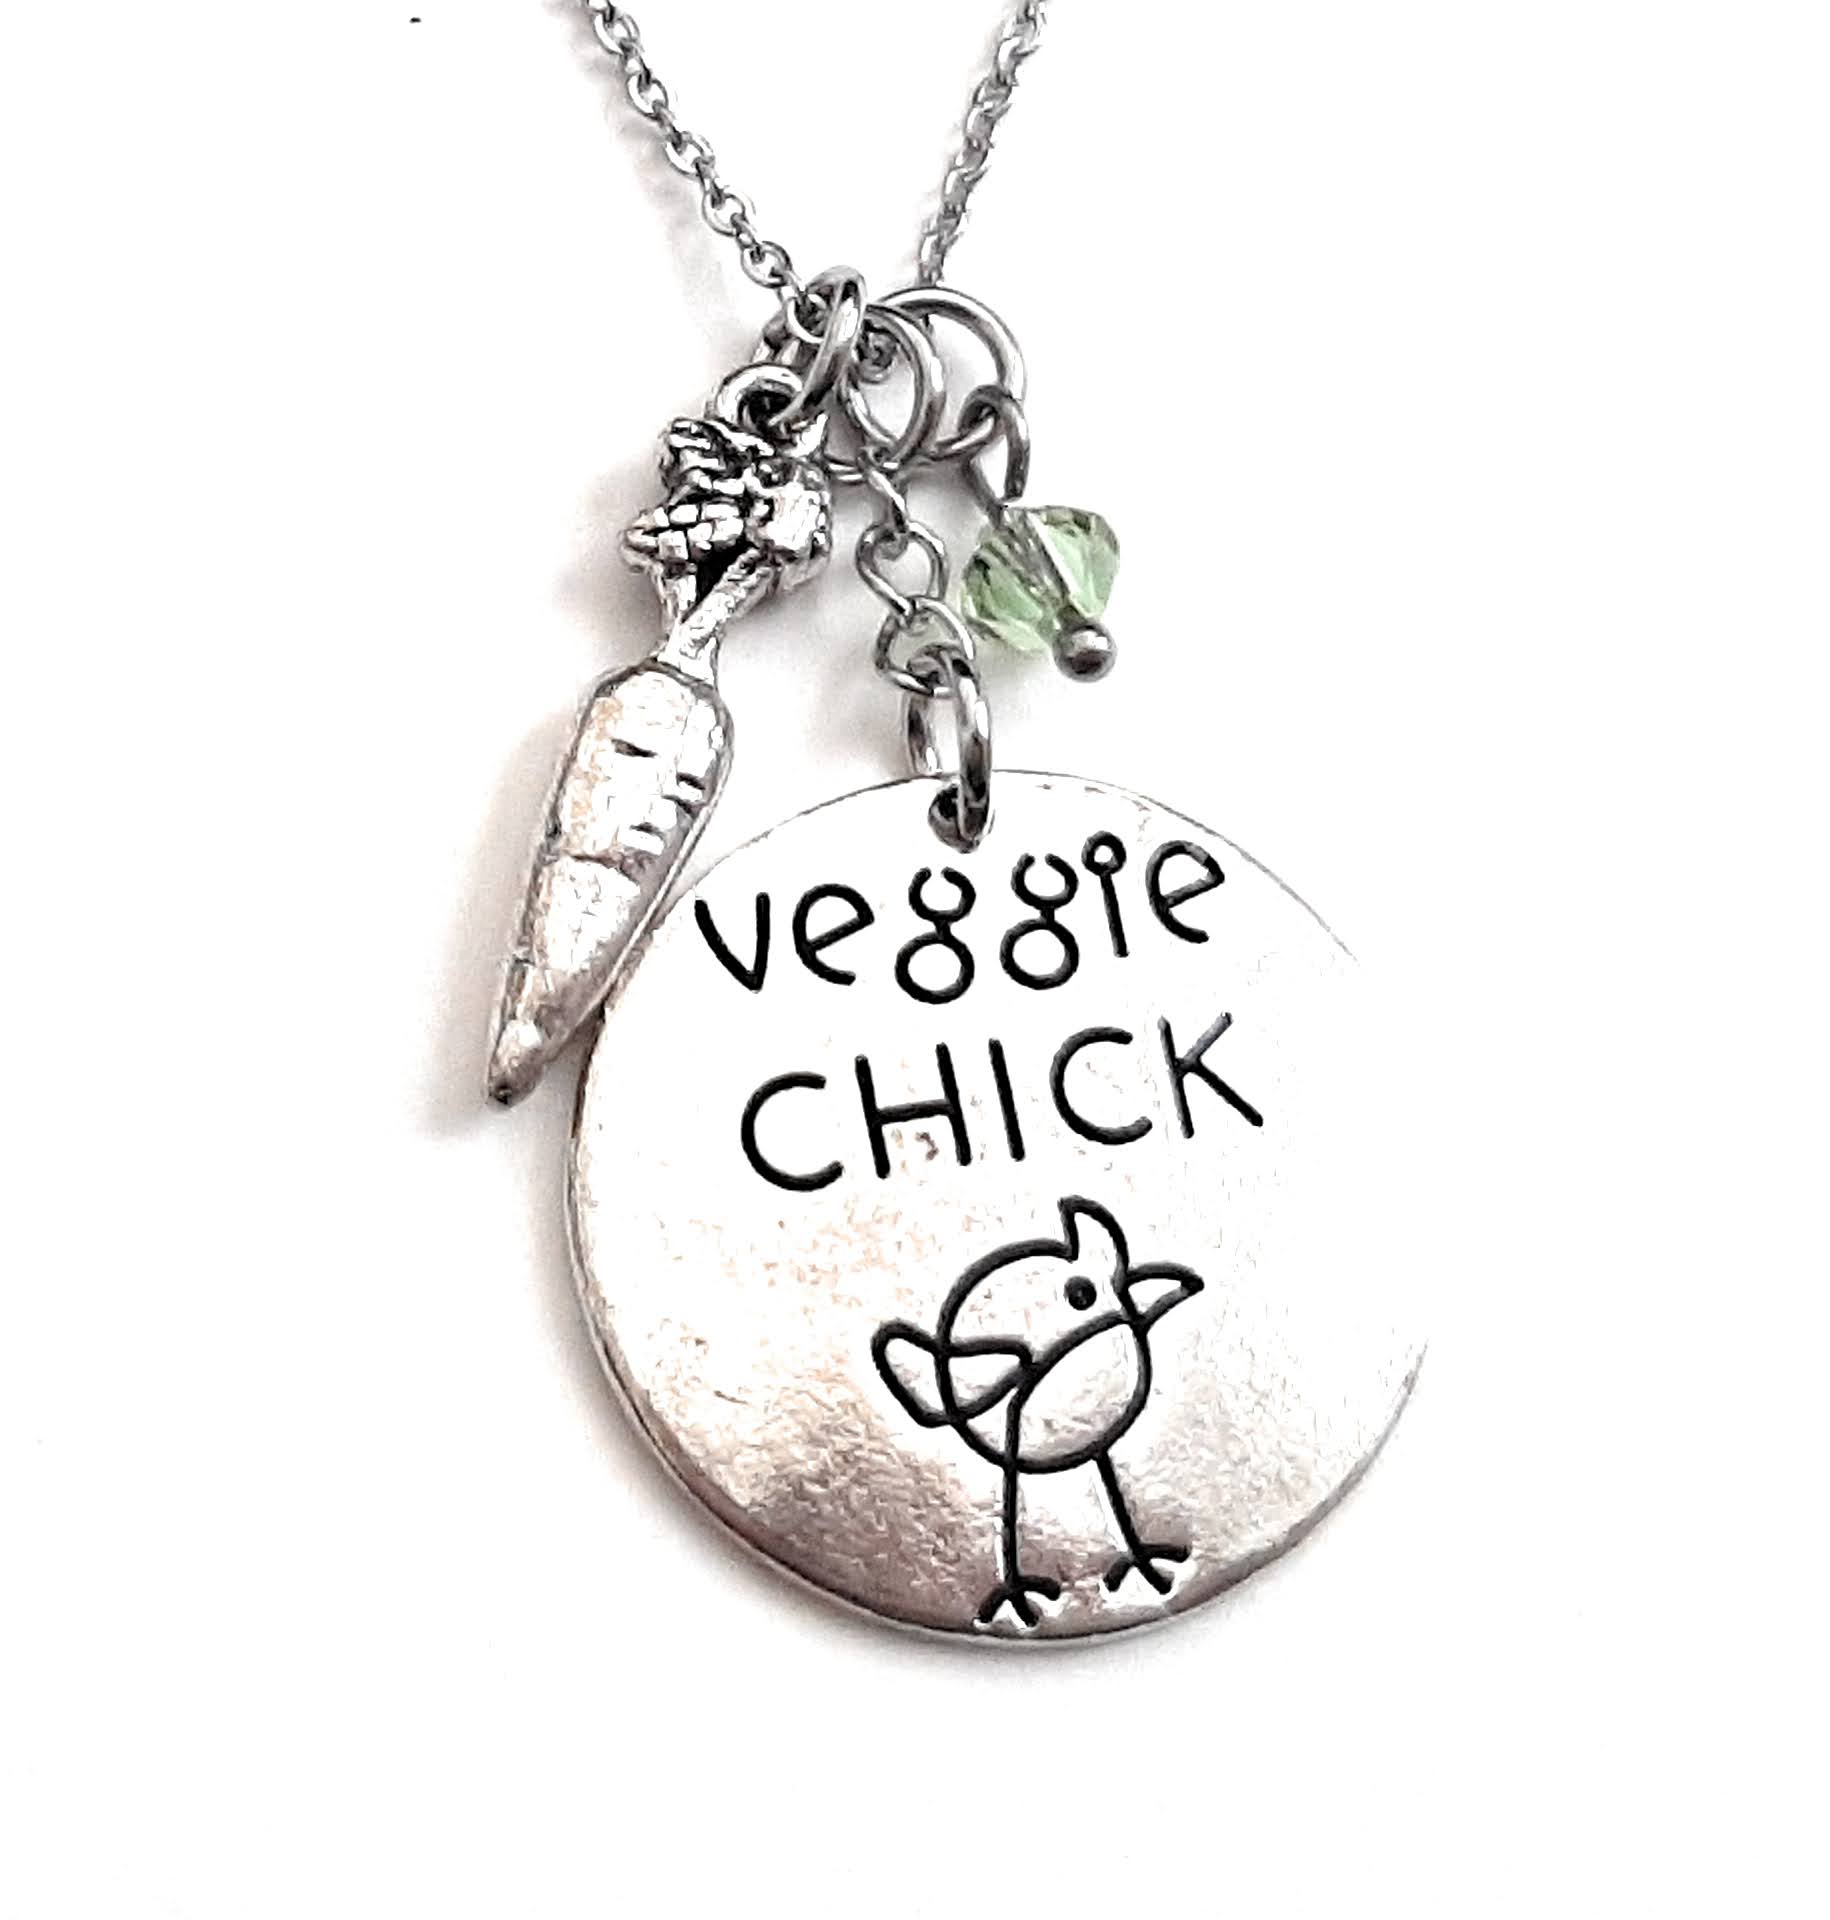 Message Pendant Necklace "Veggie Chick" Your Choice of Charm and Birthstone Color